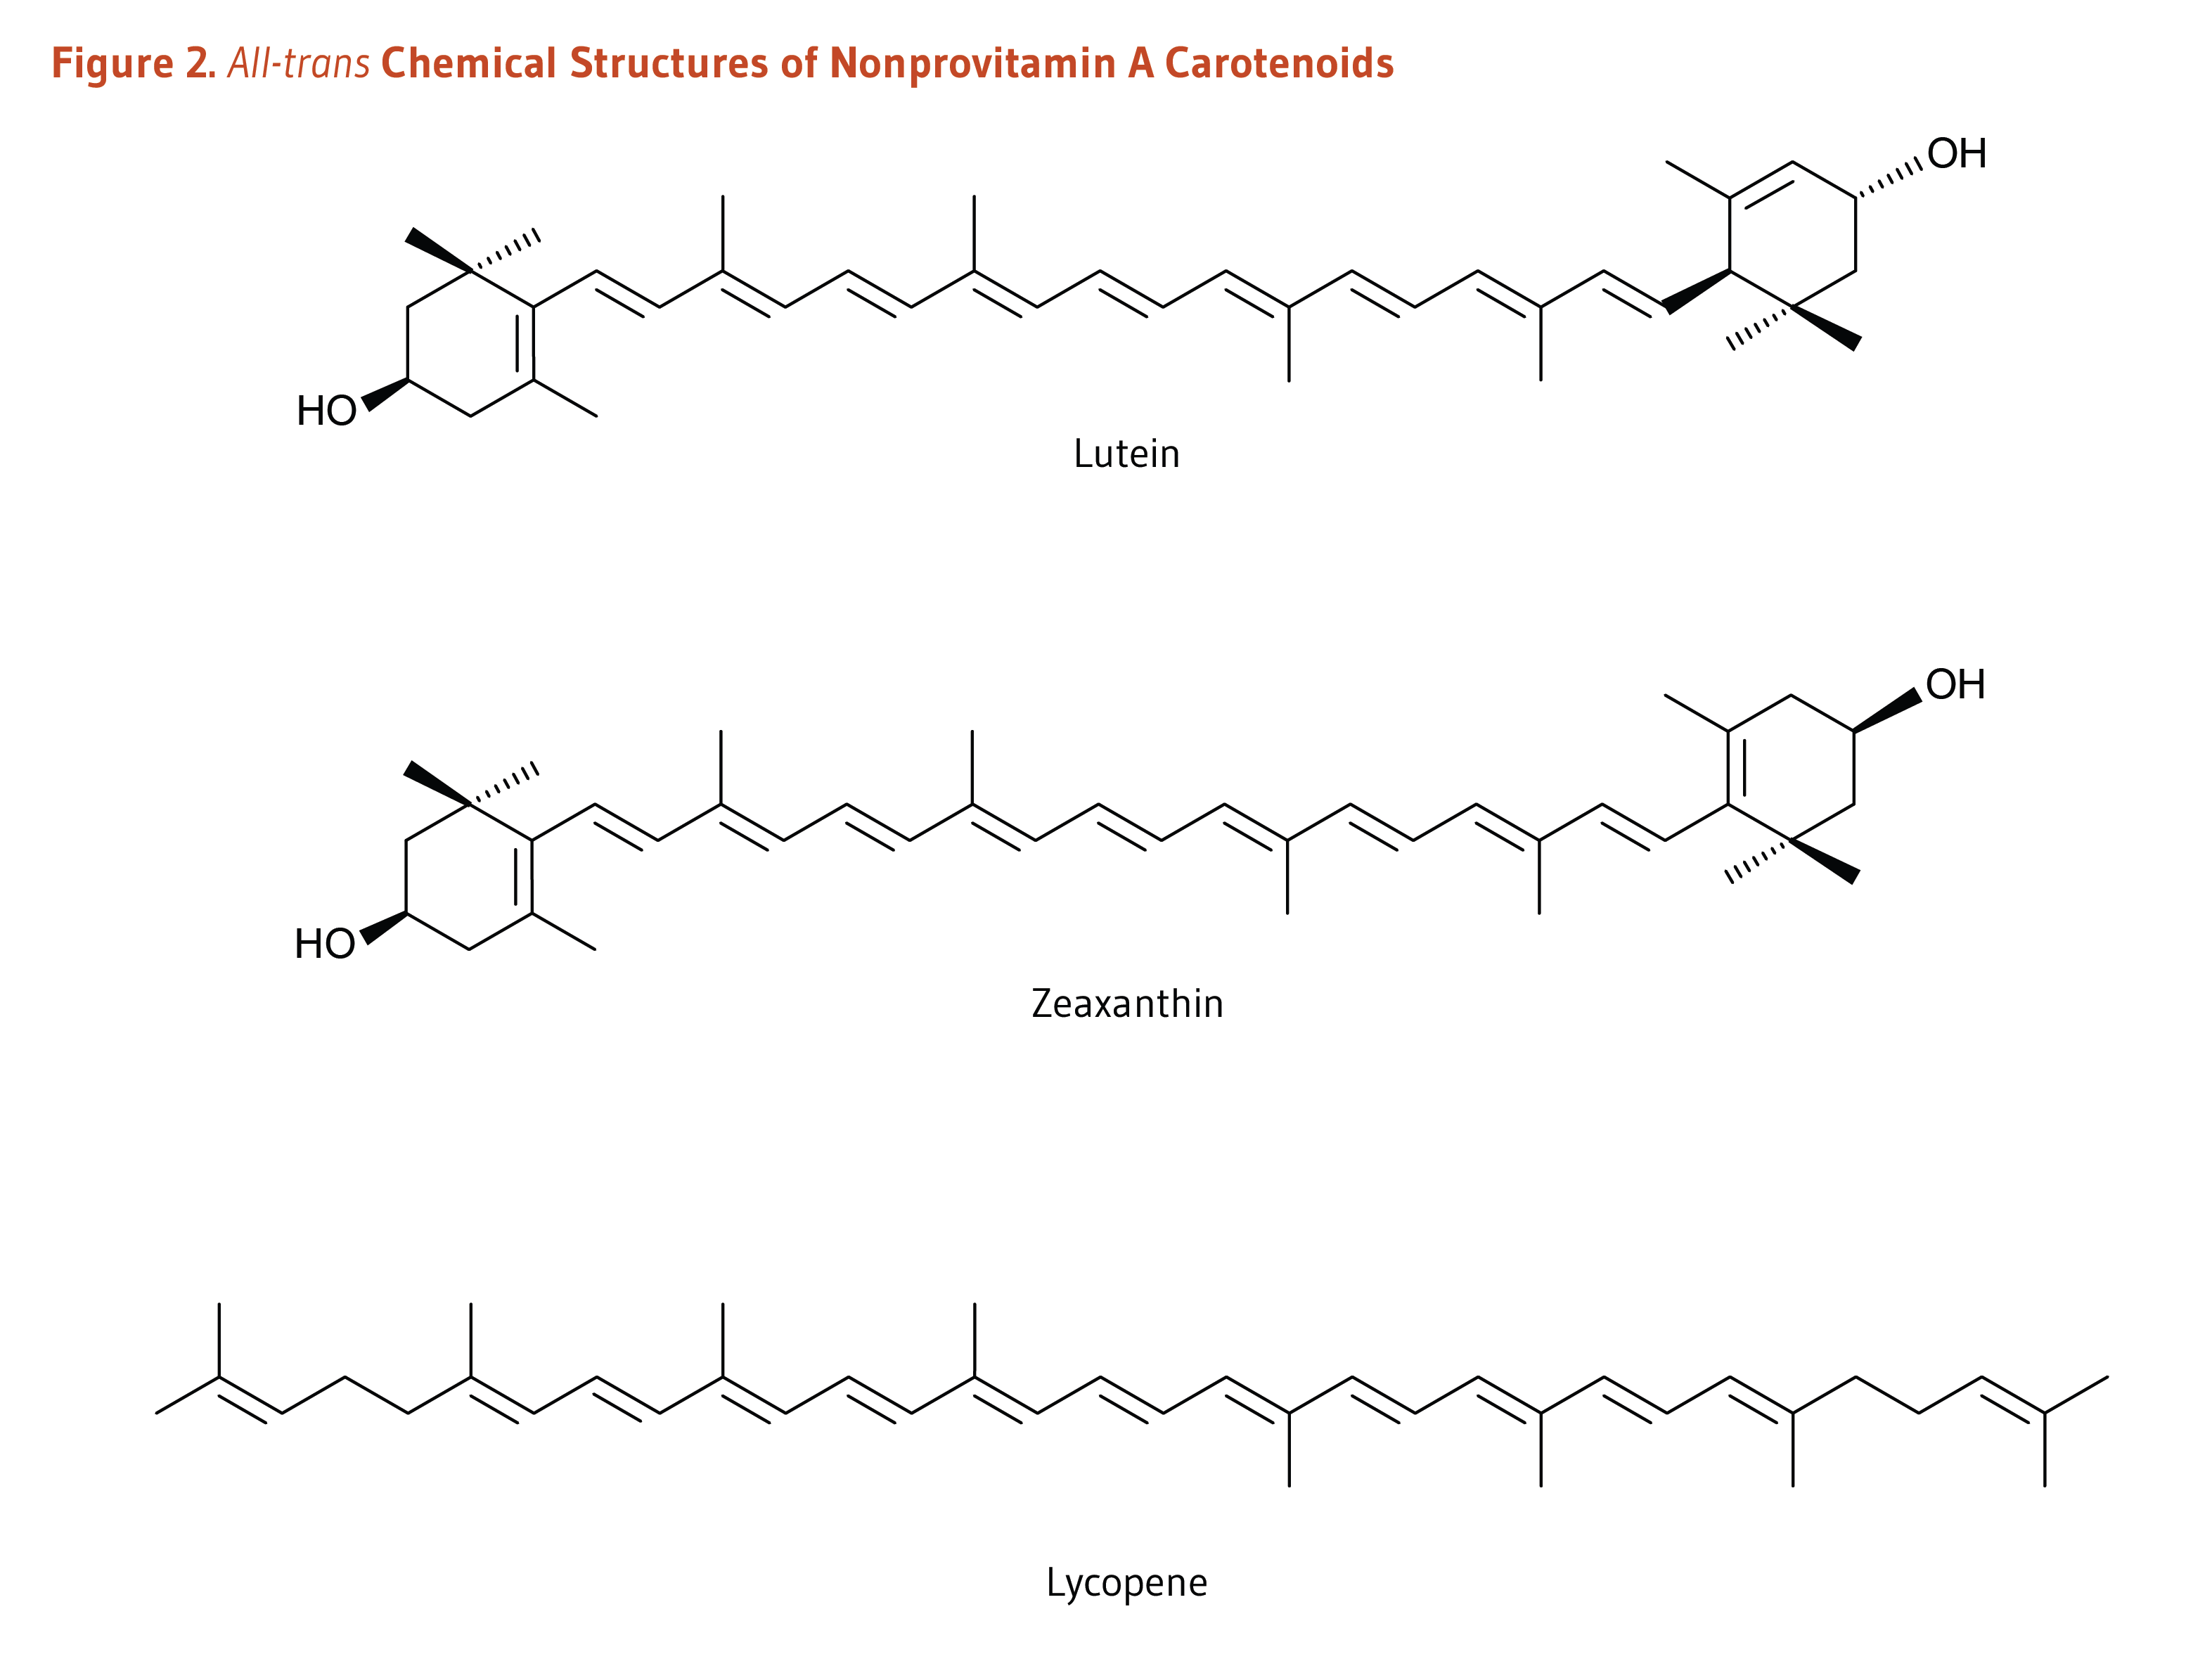 Carotenoids Figure 2. All-trans Chemical Structures of Nonprovitamin A Carotenoids: lutein, zeaxanthin, and lycopene.